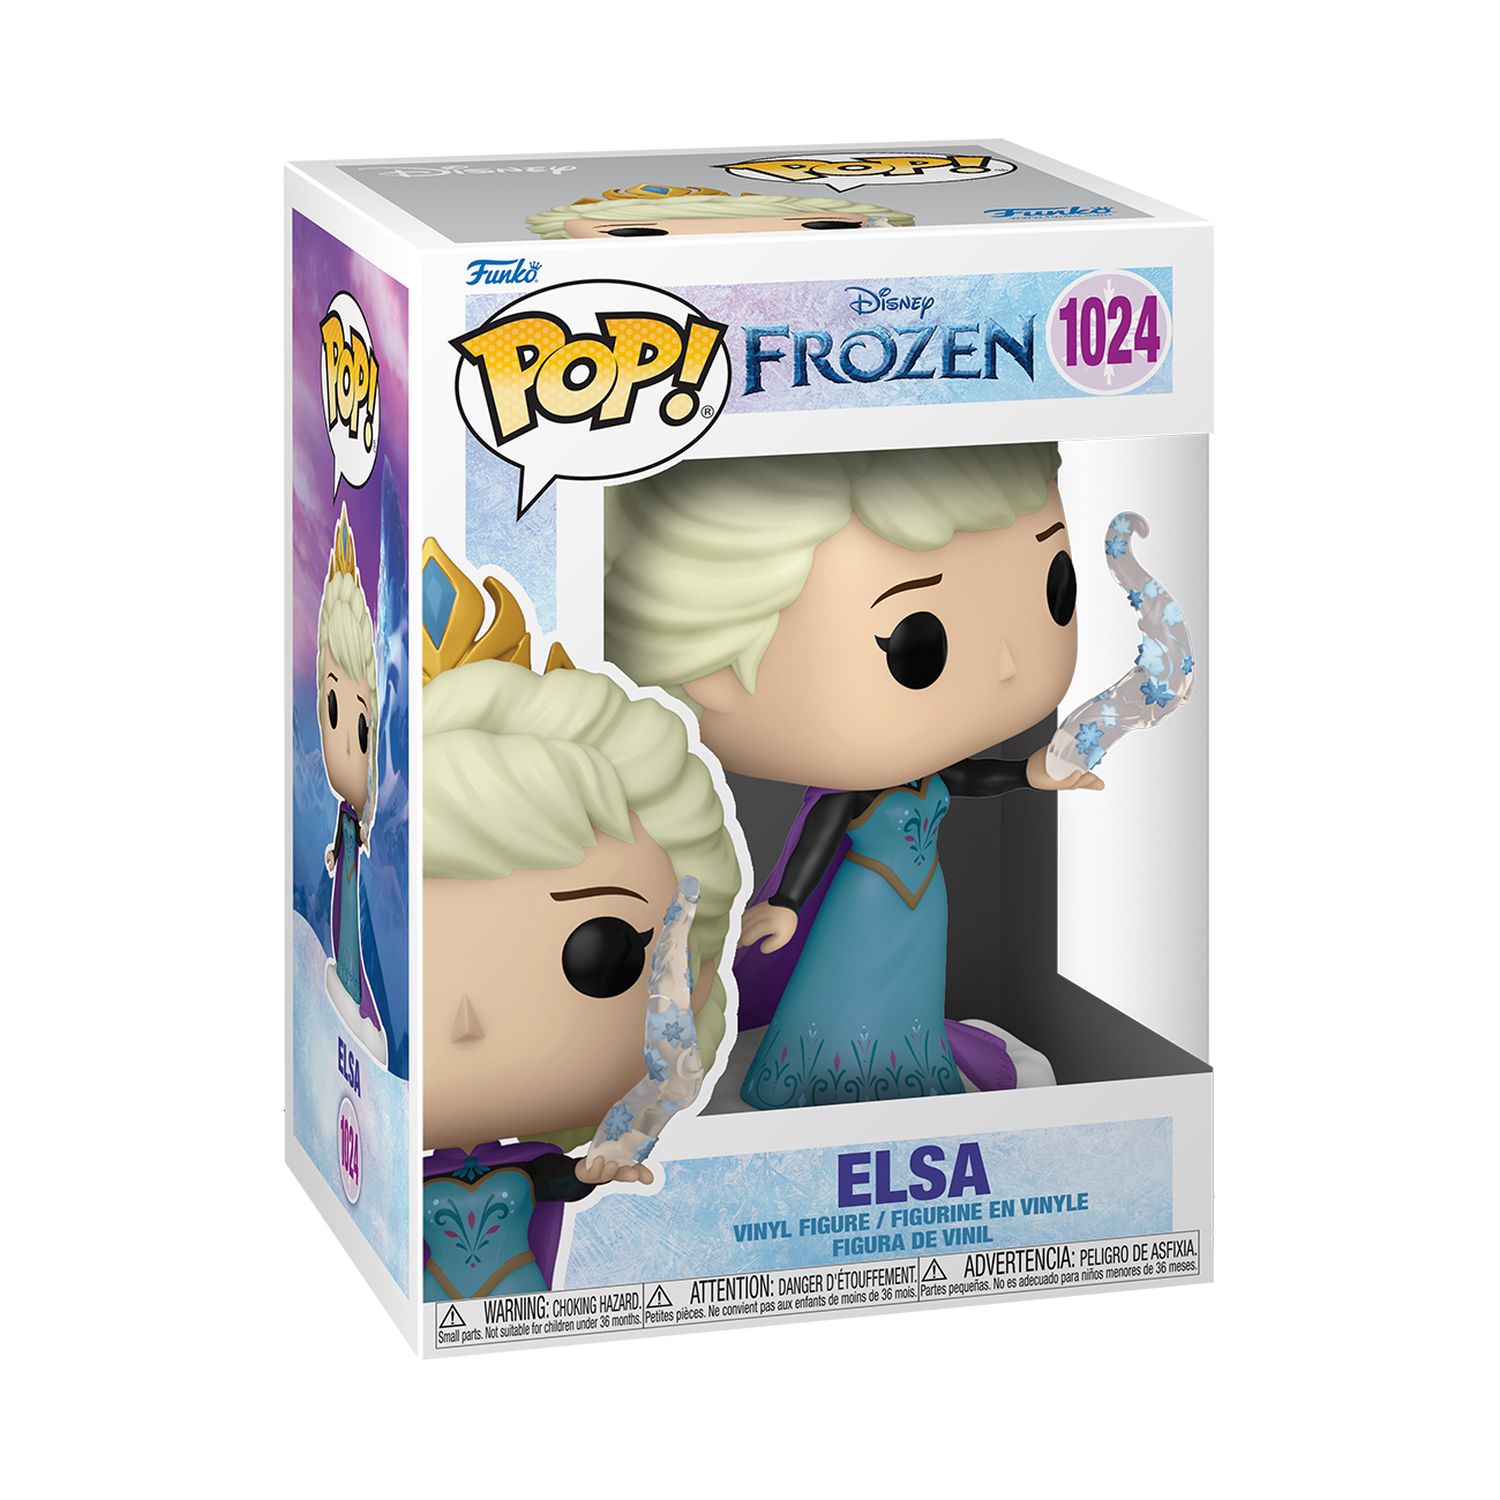 Collect your favourite Disney Princesses as Funko Pop! figures and complete your Disney Ultimate Princess collection with Pop! Elsa with snow flakes. Vinyl figure is approximately 13Cm tall.